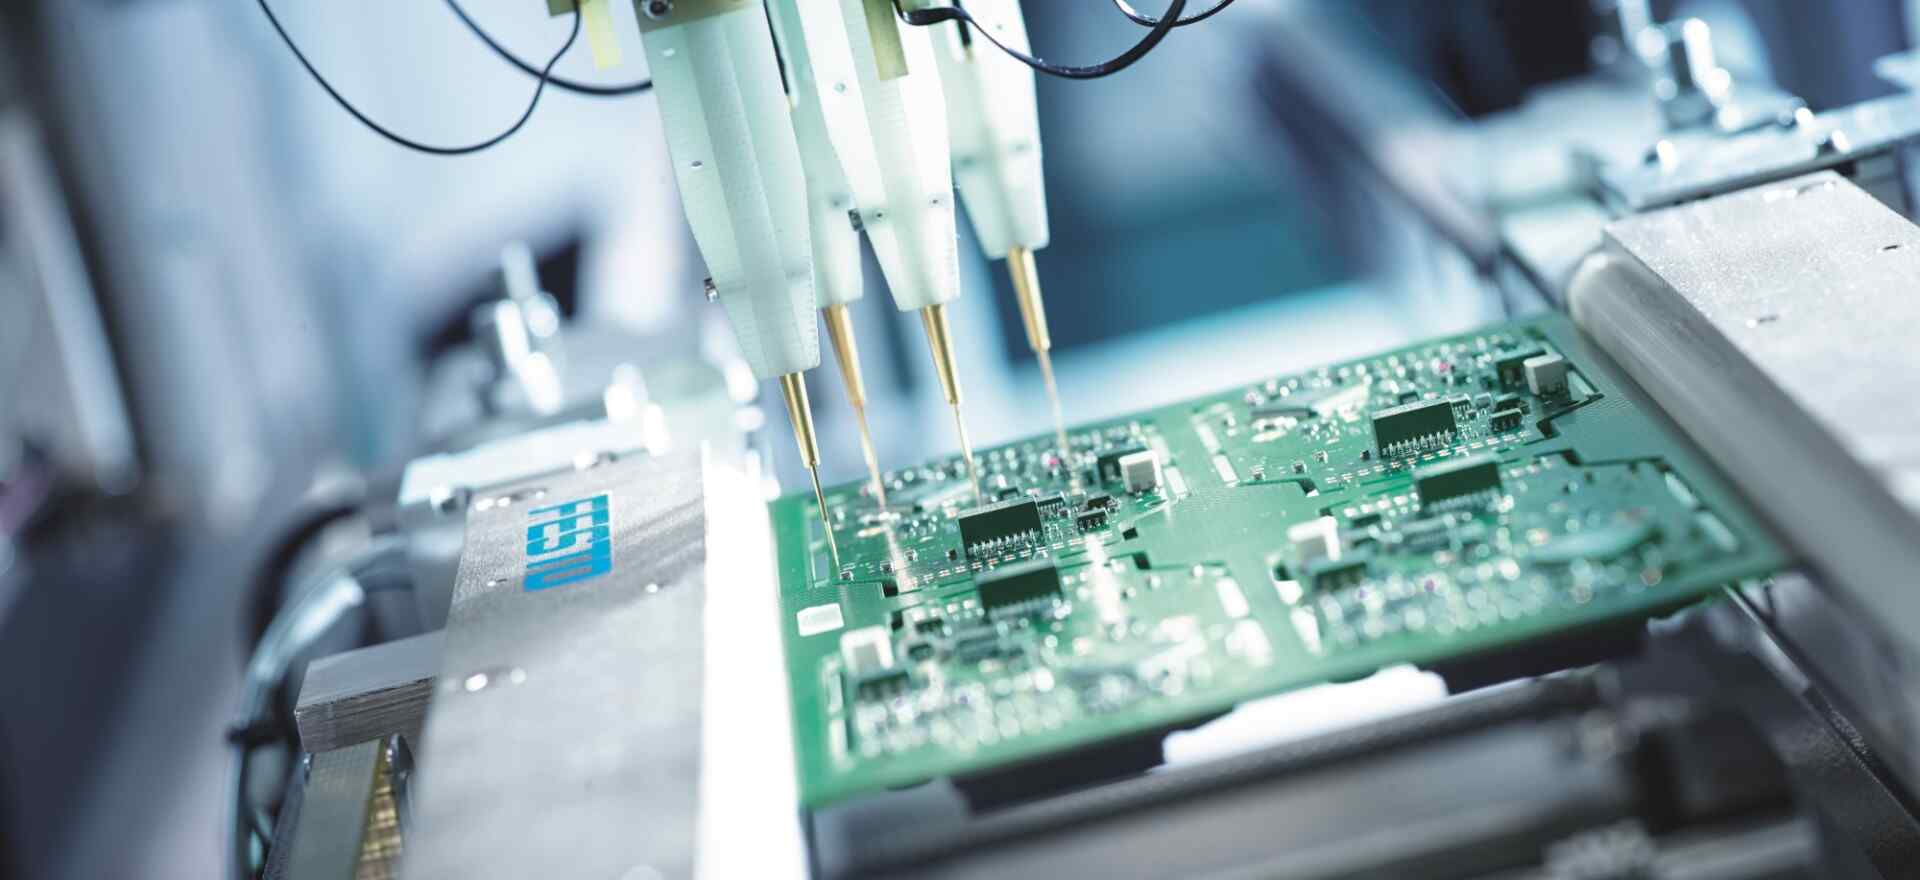 Learn How To Produce Printed Circuit Boards – A Guide to PCB Manufacturing